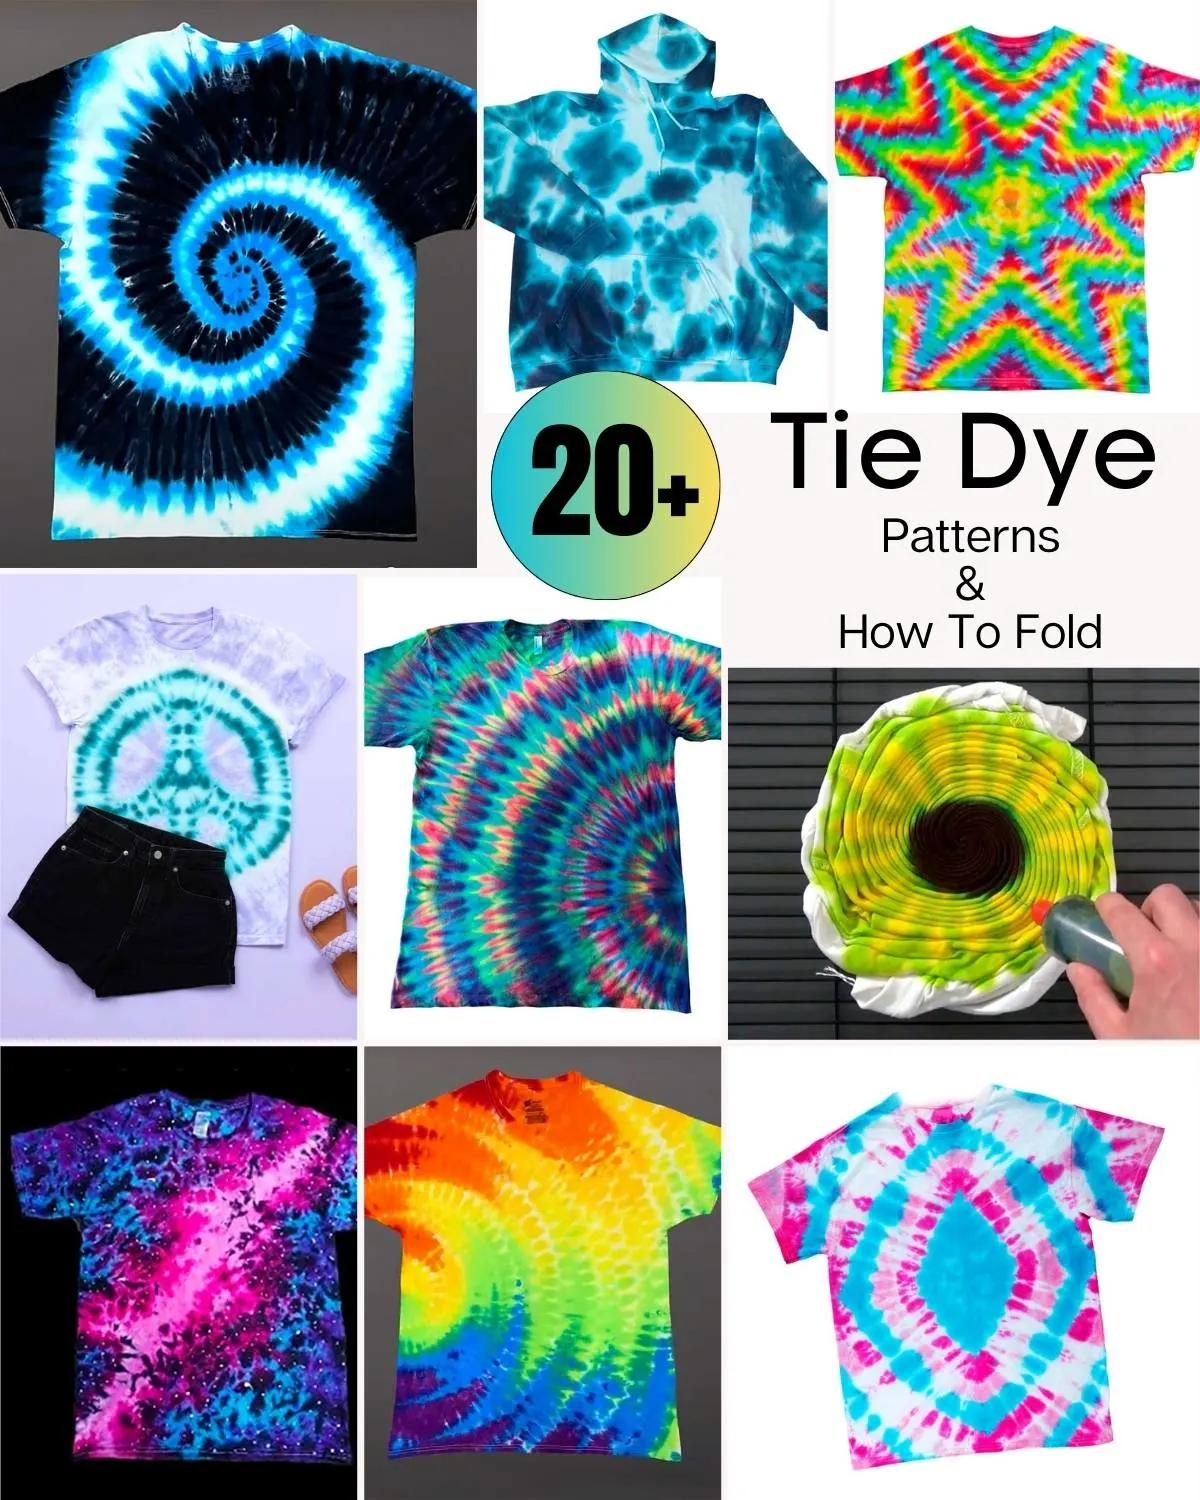 Tie dying is a great summer outdoor activity. Here are 25 Free Tie Dye Patterns and Folding Techniques for beginners, intermediates and advanced adults and children!